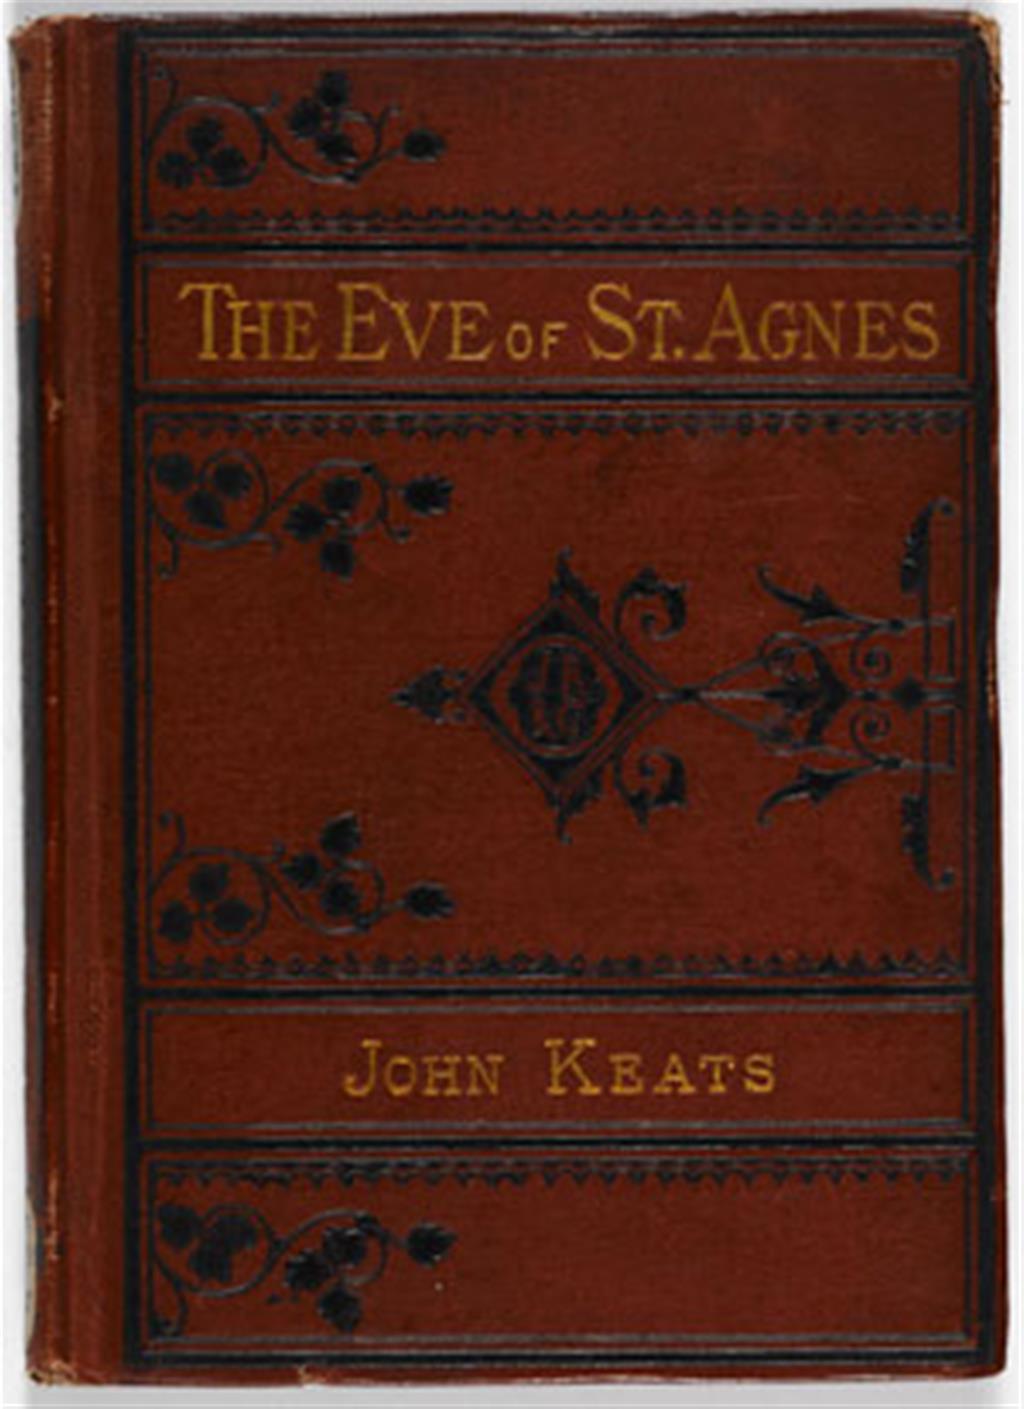 The Eve of St. Agnes and Other Poems cover image